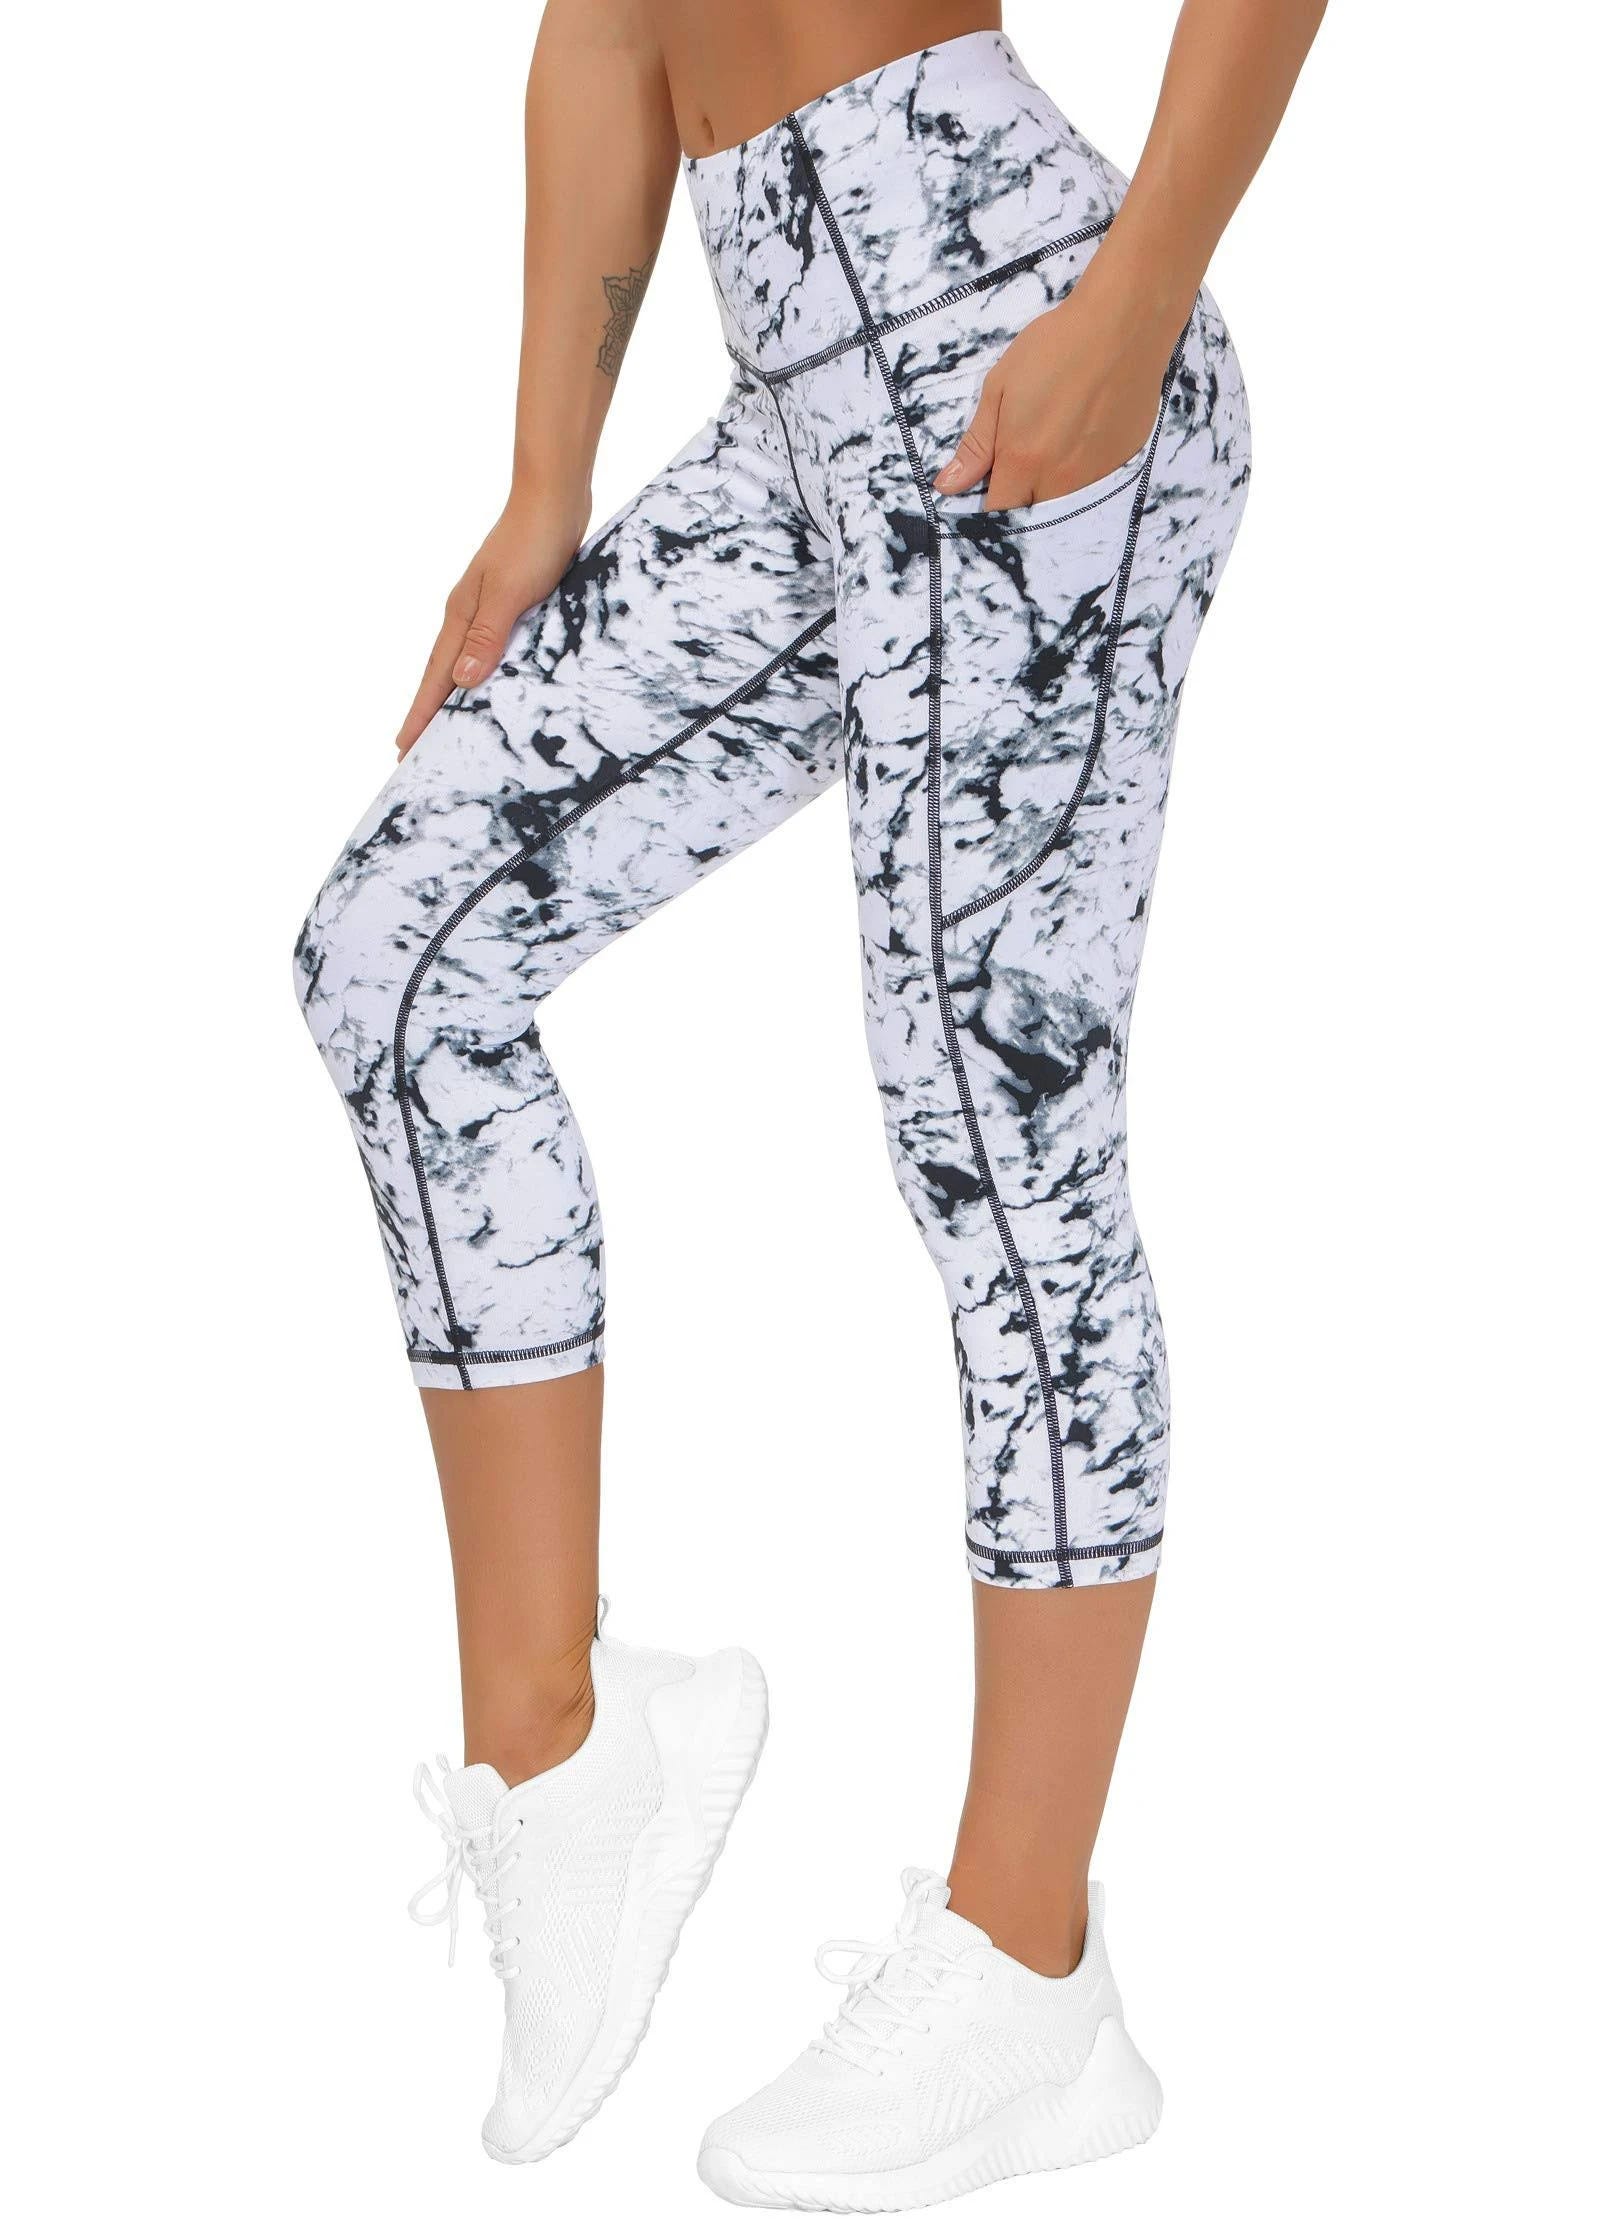 Comfortable High Waist Yoga Leggings with Pockets and Breathable Fabric | Image